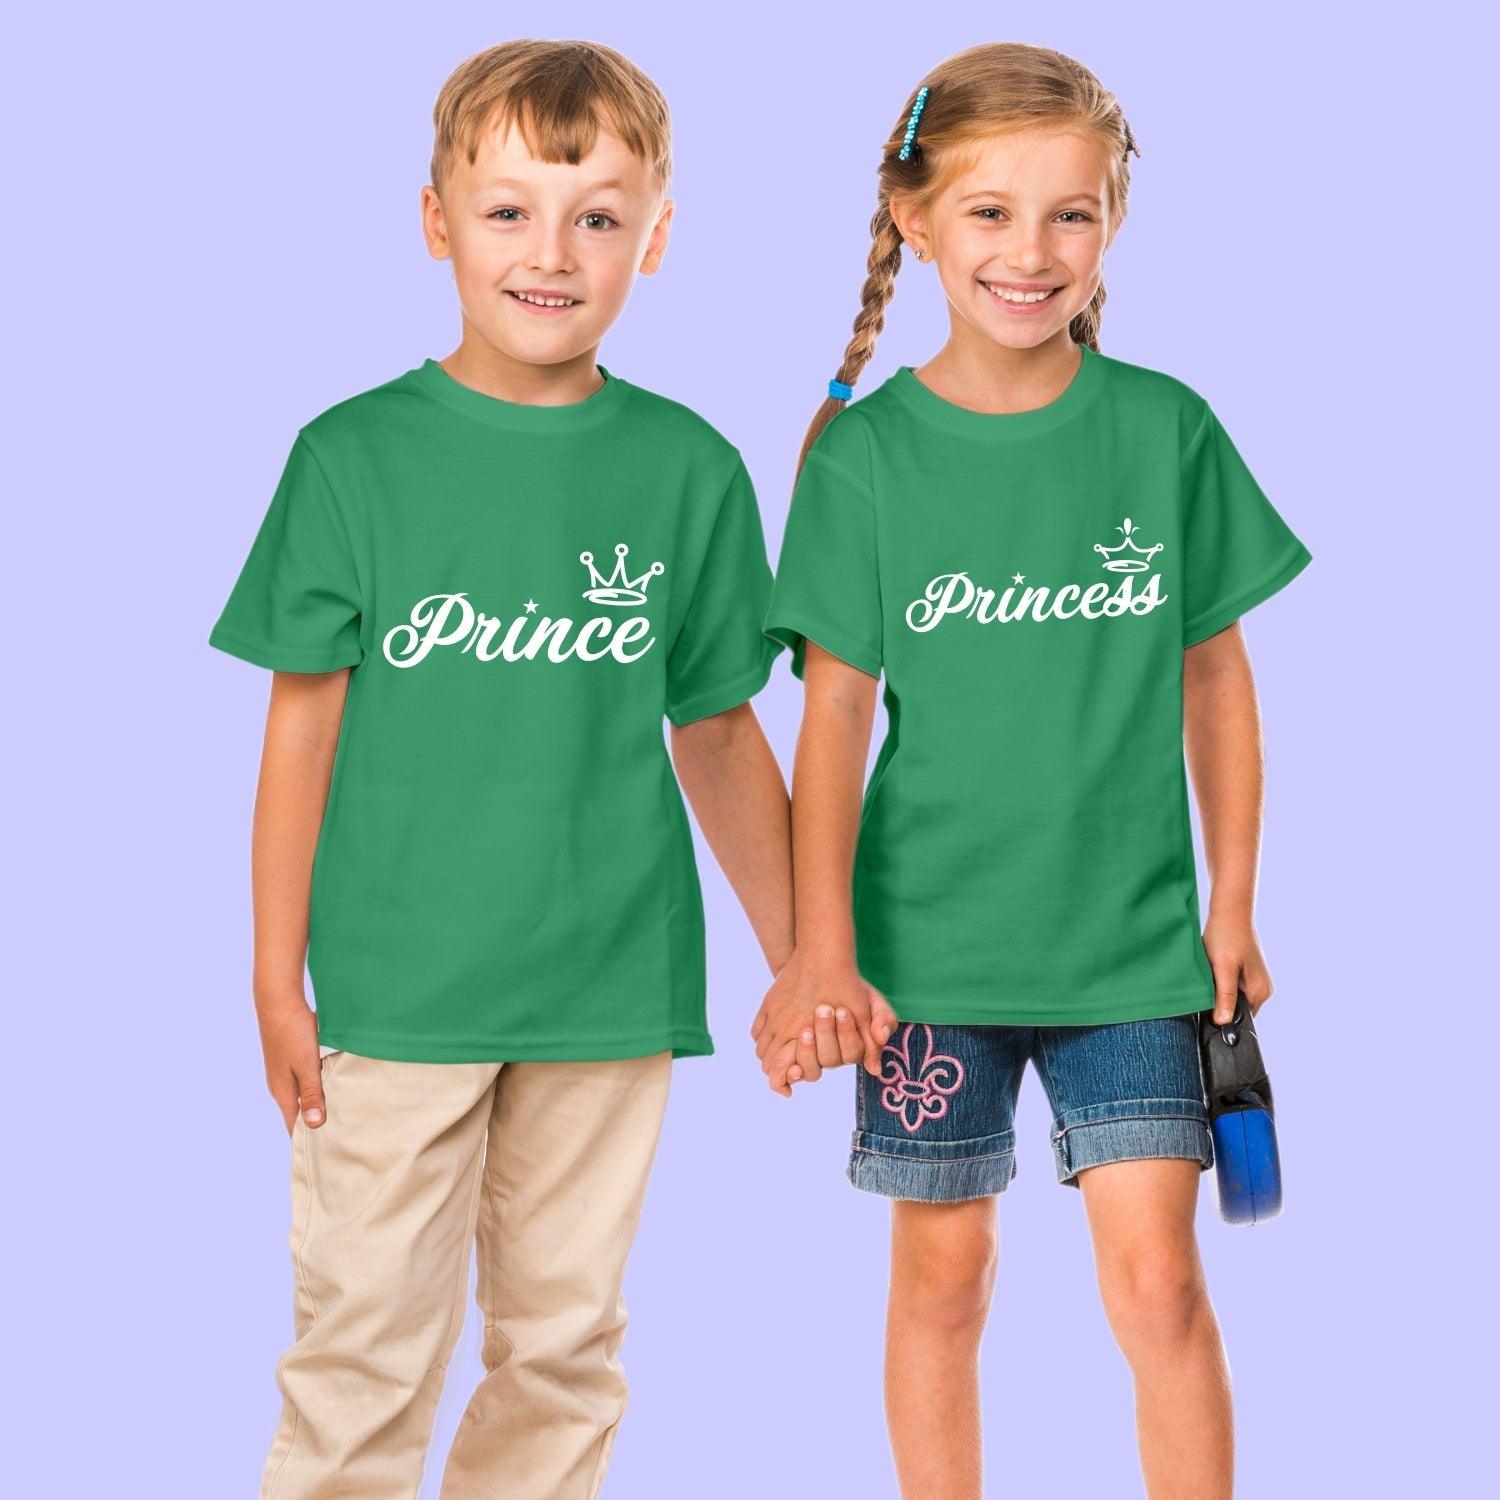 Sibling T Shirt for Kids Brother and Sister in Green Colour - Prince Princess Variant